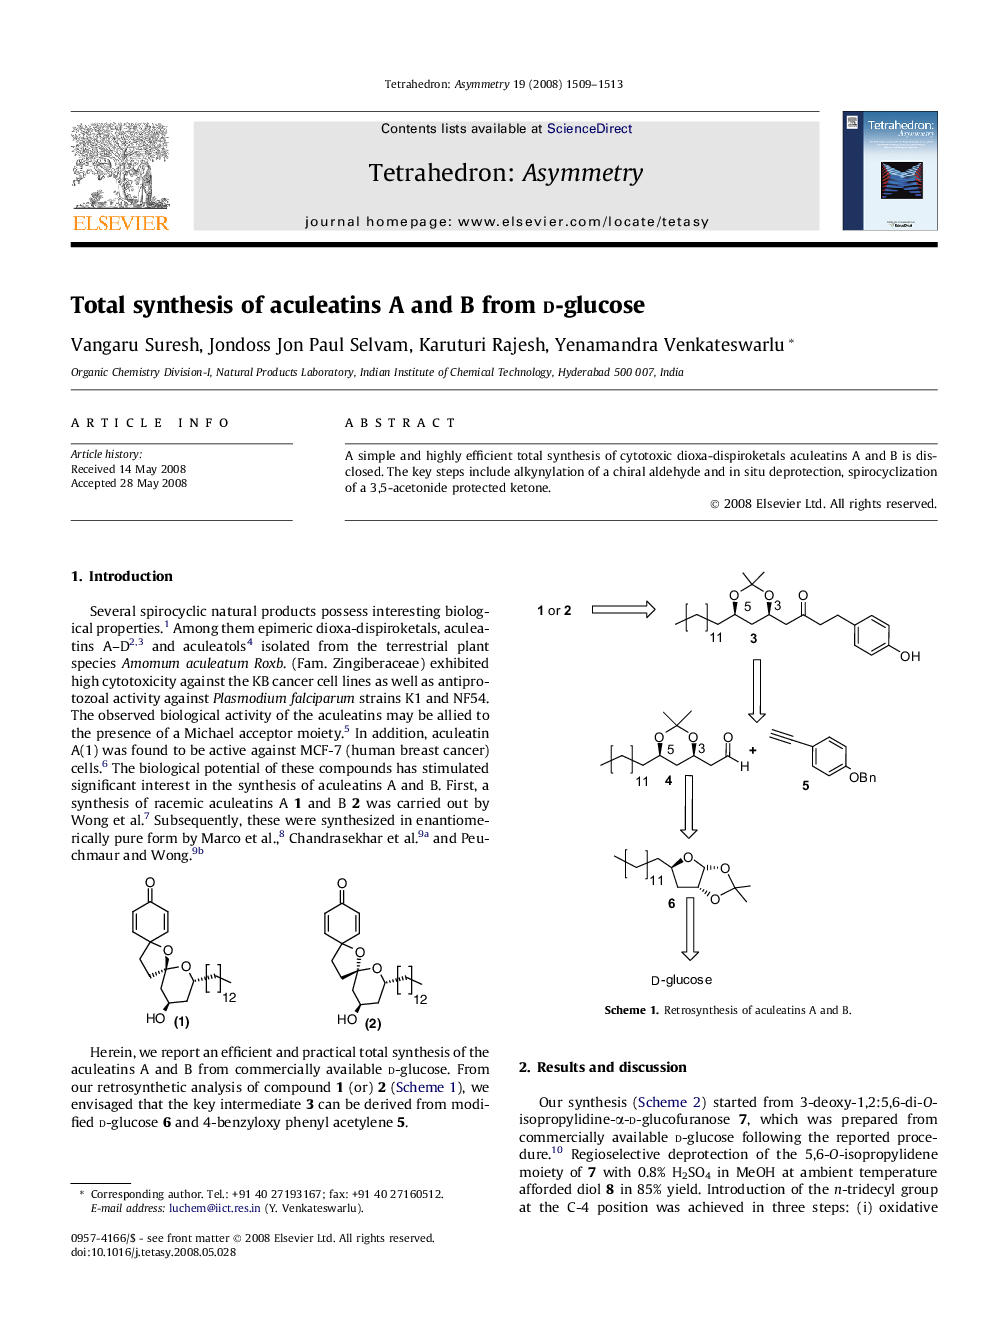 Total synthesis of aculeatins A and B from d-glucose